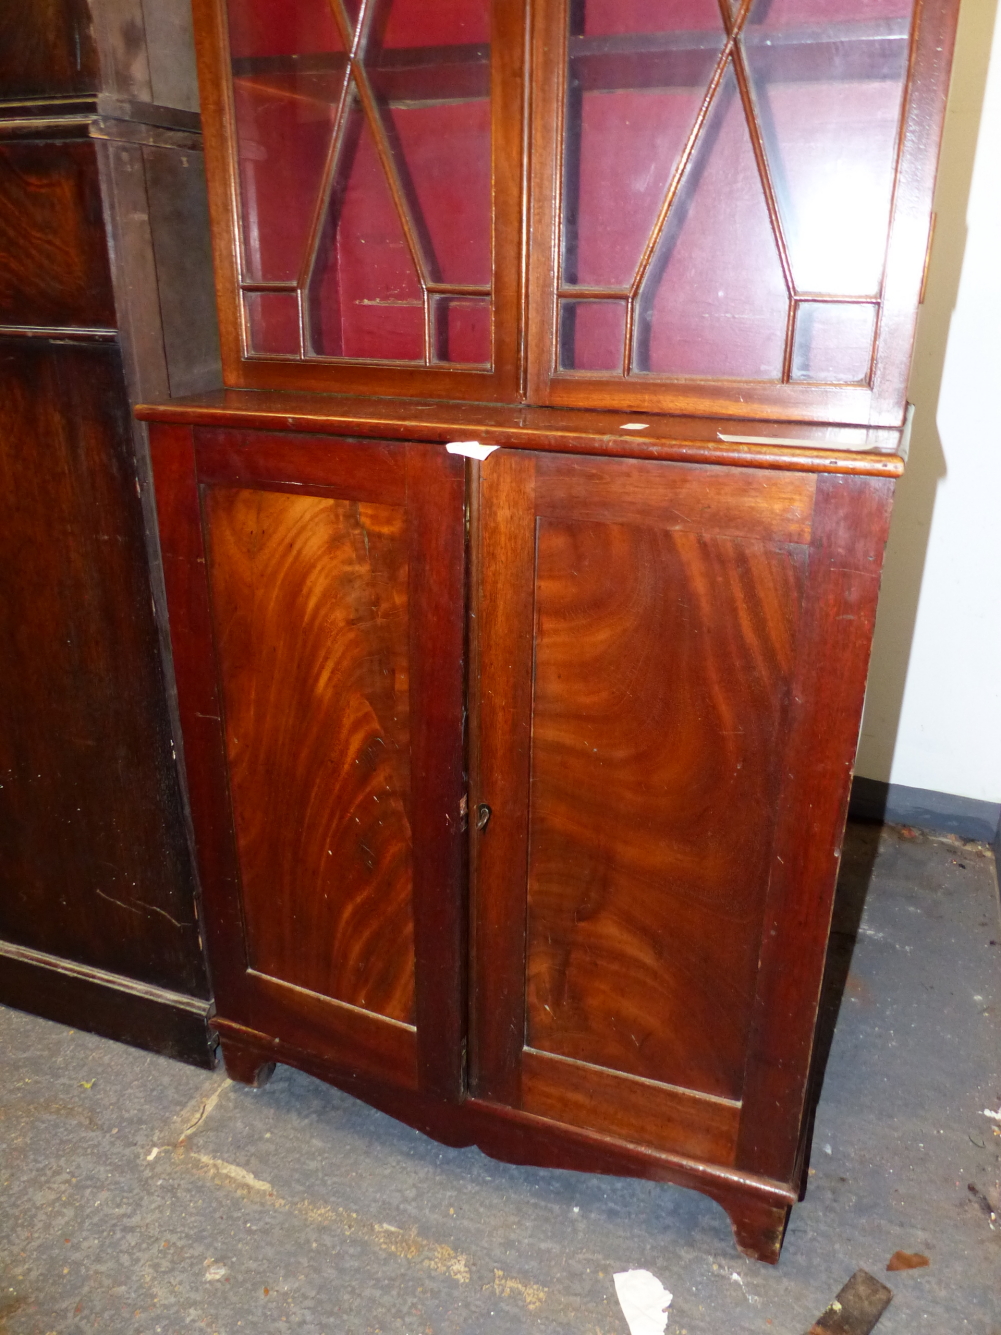 A 19th C. MAHOGANY DISPLAY CABINET, THE UPPER HALF WITH ASTRAGAL GLAZED DOOR, THE BASE WITH A - Image 5 of 9